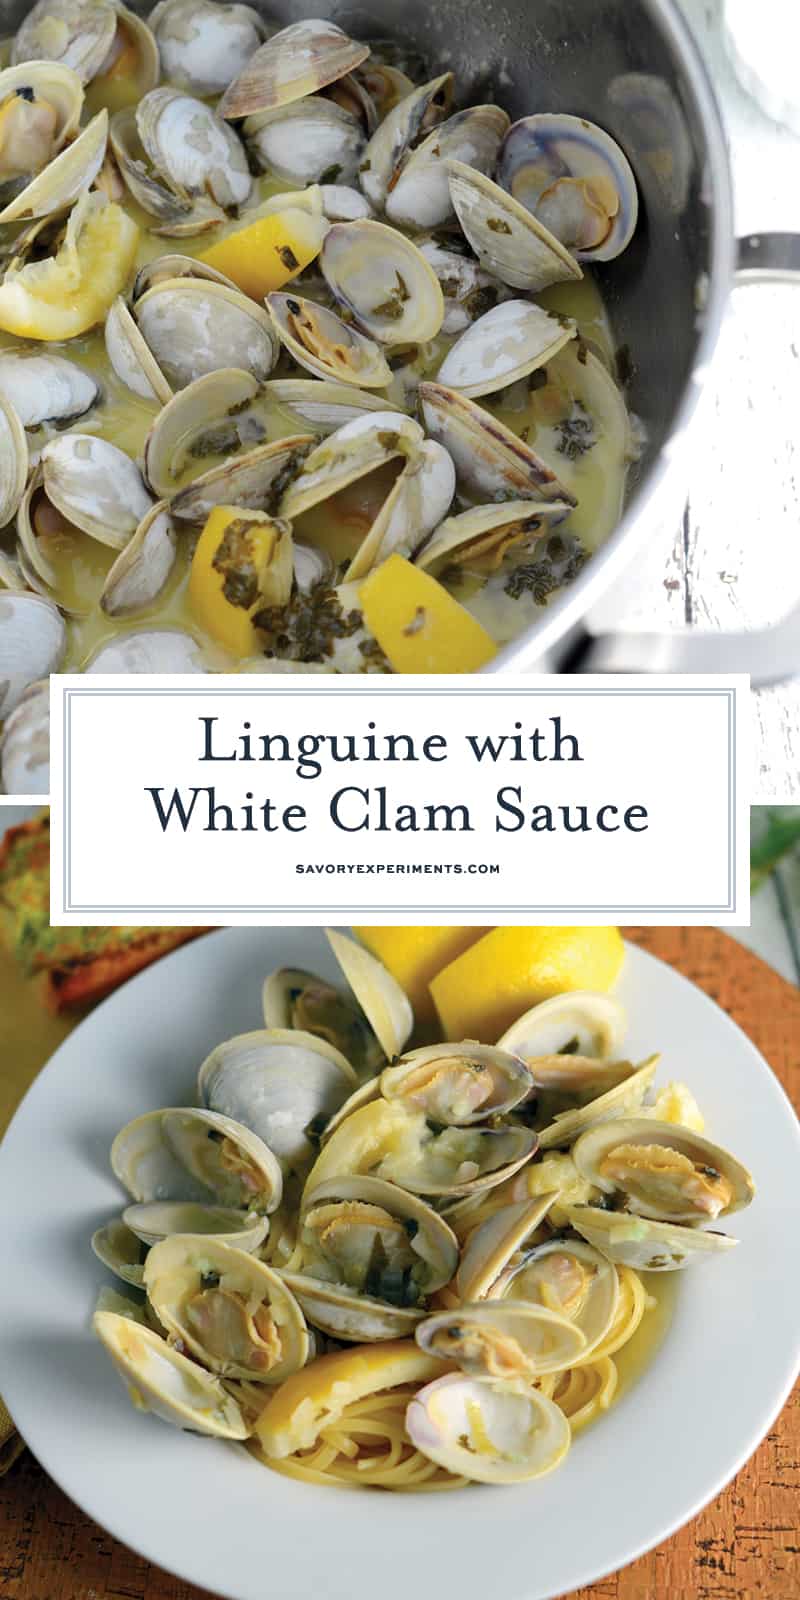 Linguine with White Clam Sauce, just like at the restaurant. Buttery broth, chopped and whole clams in an easy shallot, garlic and parsley sauce. #seafoodpastarecipe #easyseafoodrecipes www.savoryexperiments.com 